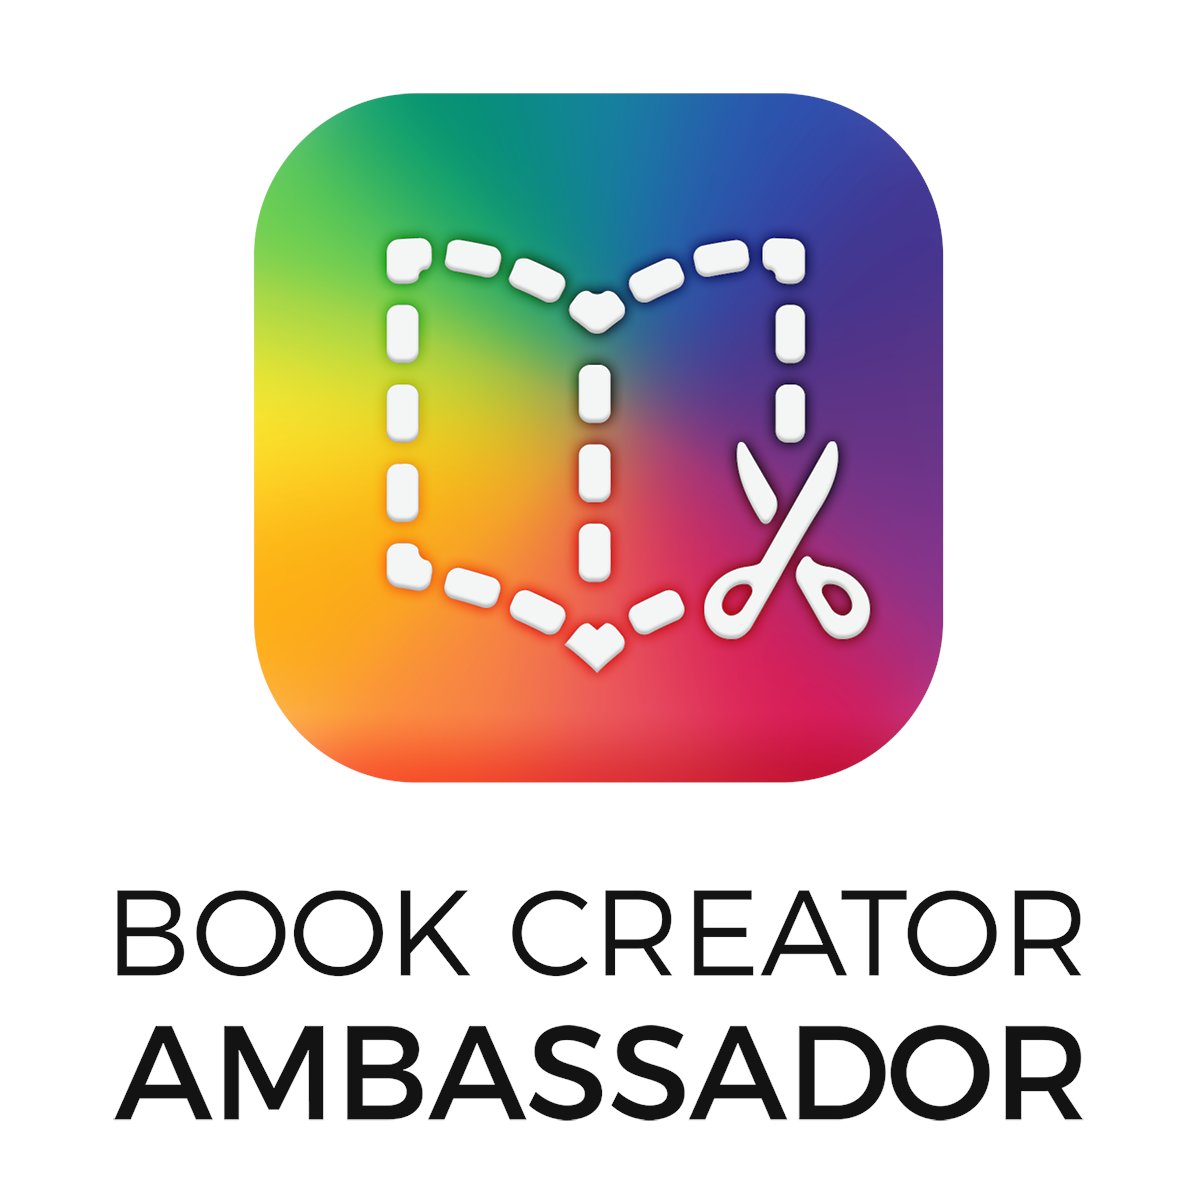 I'm delighted to be a new Book Creator Ambassador! Thank you!
@BookCreatorApp #BookCreatorAmbassador